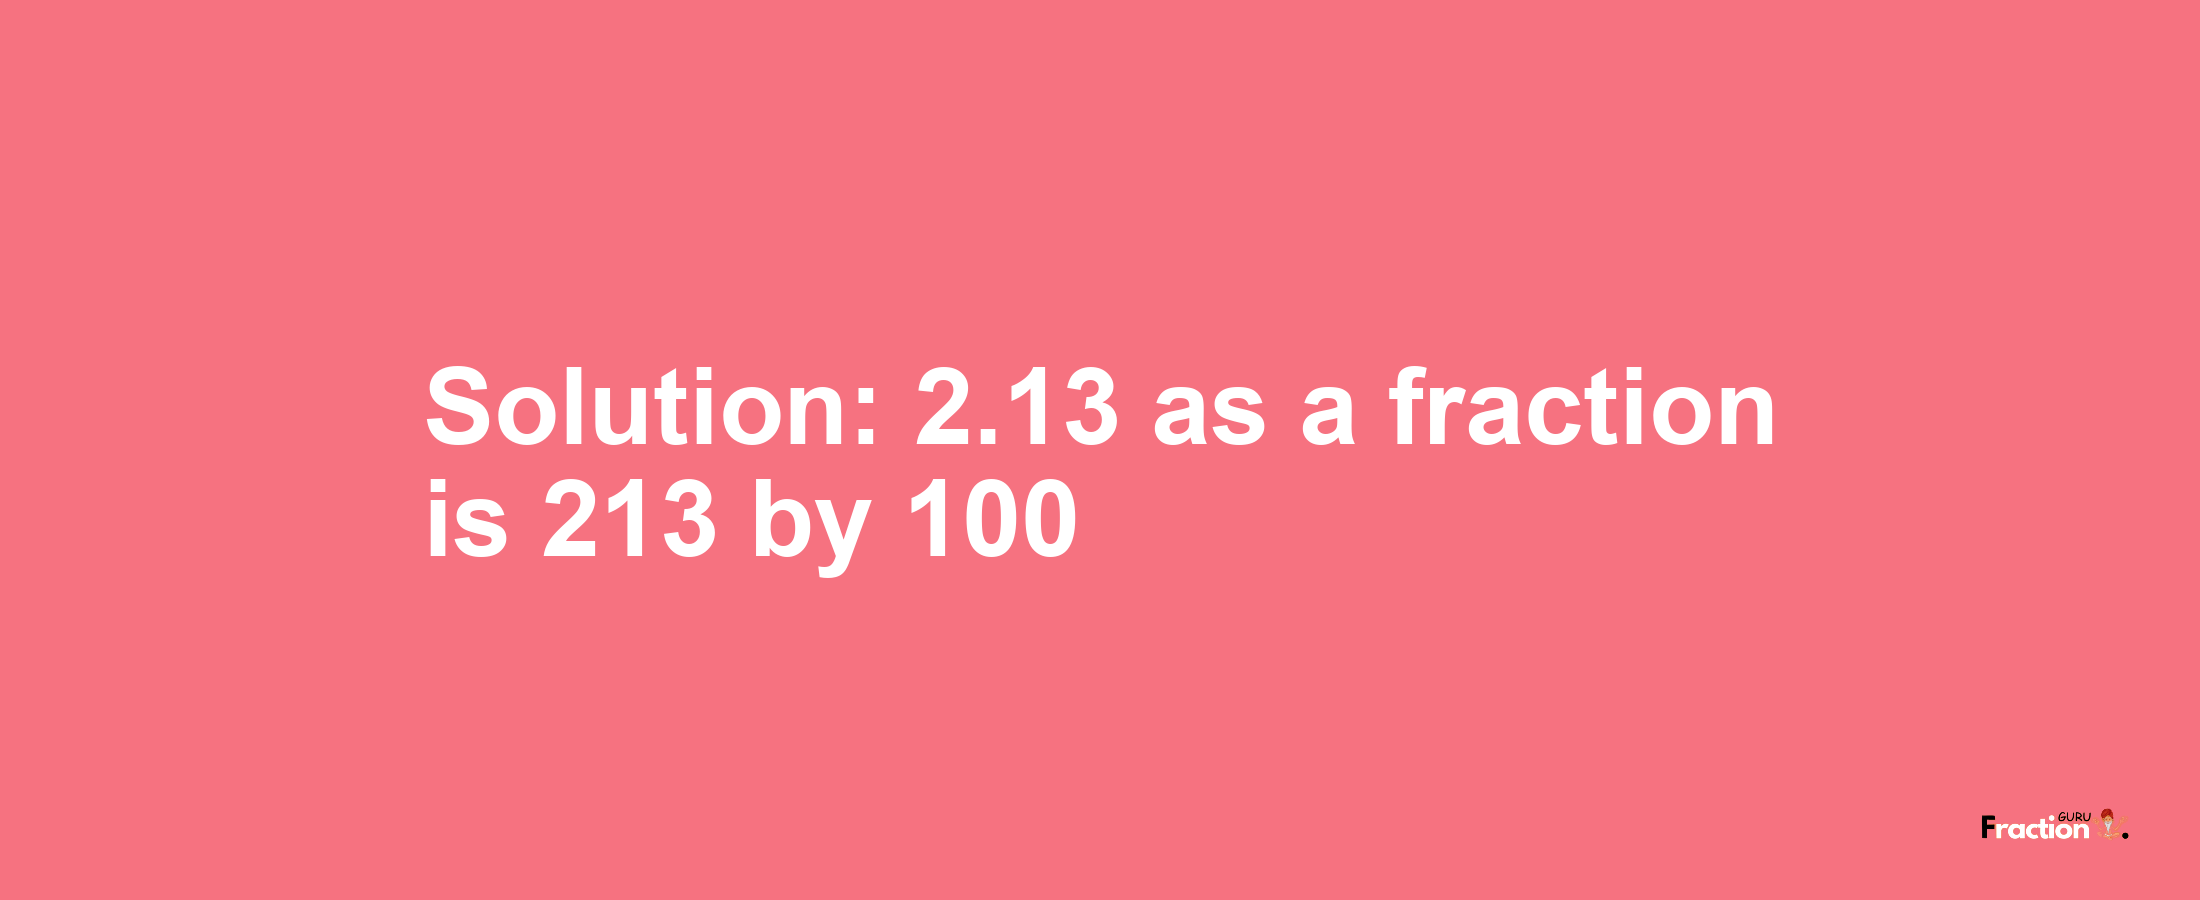 Solution:2.13 as a fraction is 213/100